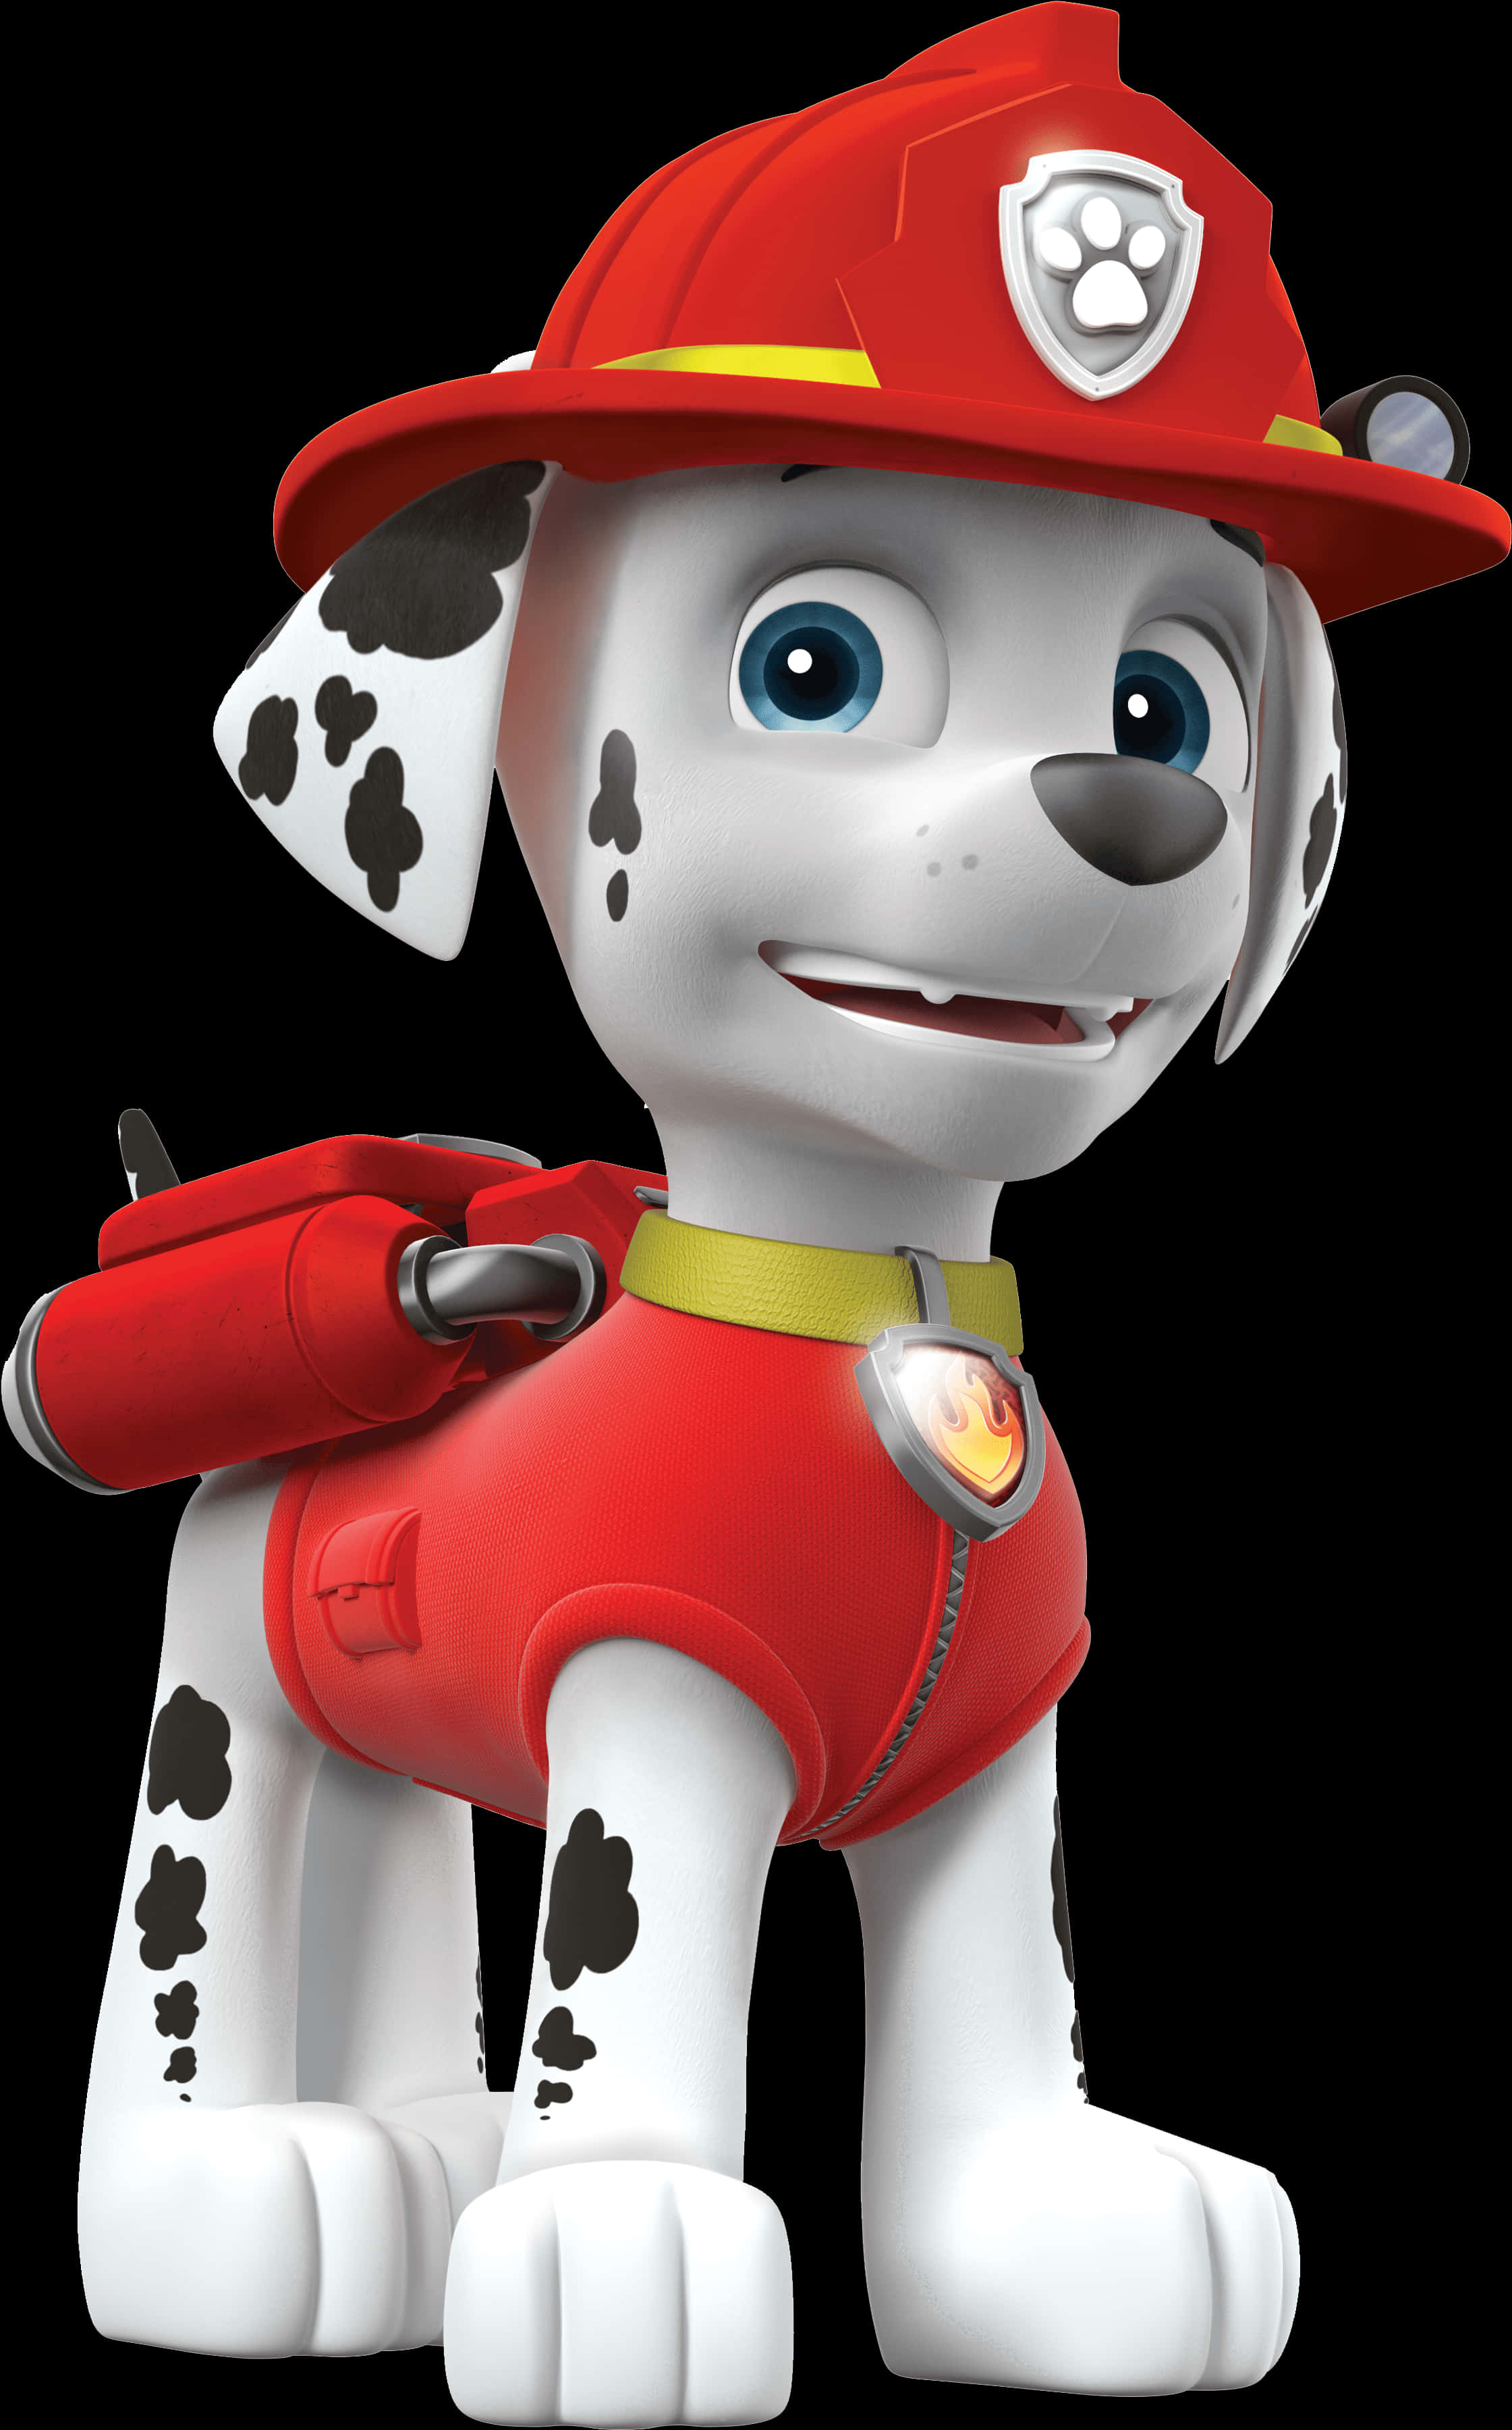 A Cartoon Dog Wearing A Red Hat And Red Jacket